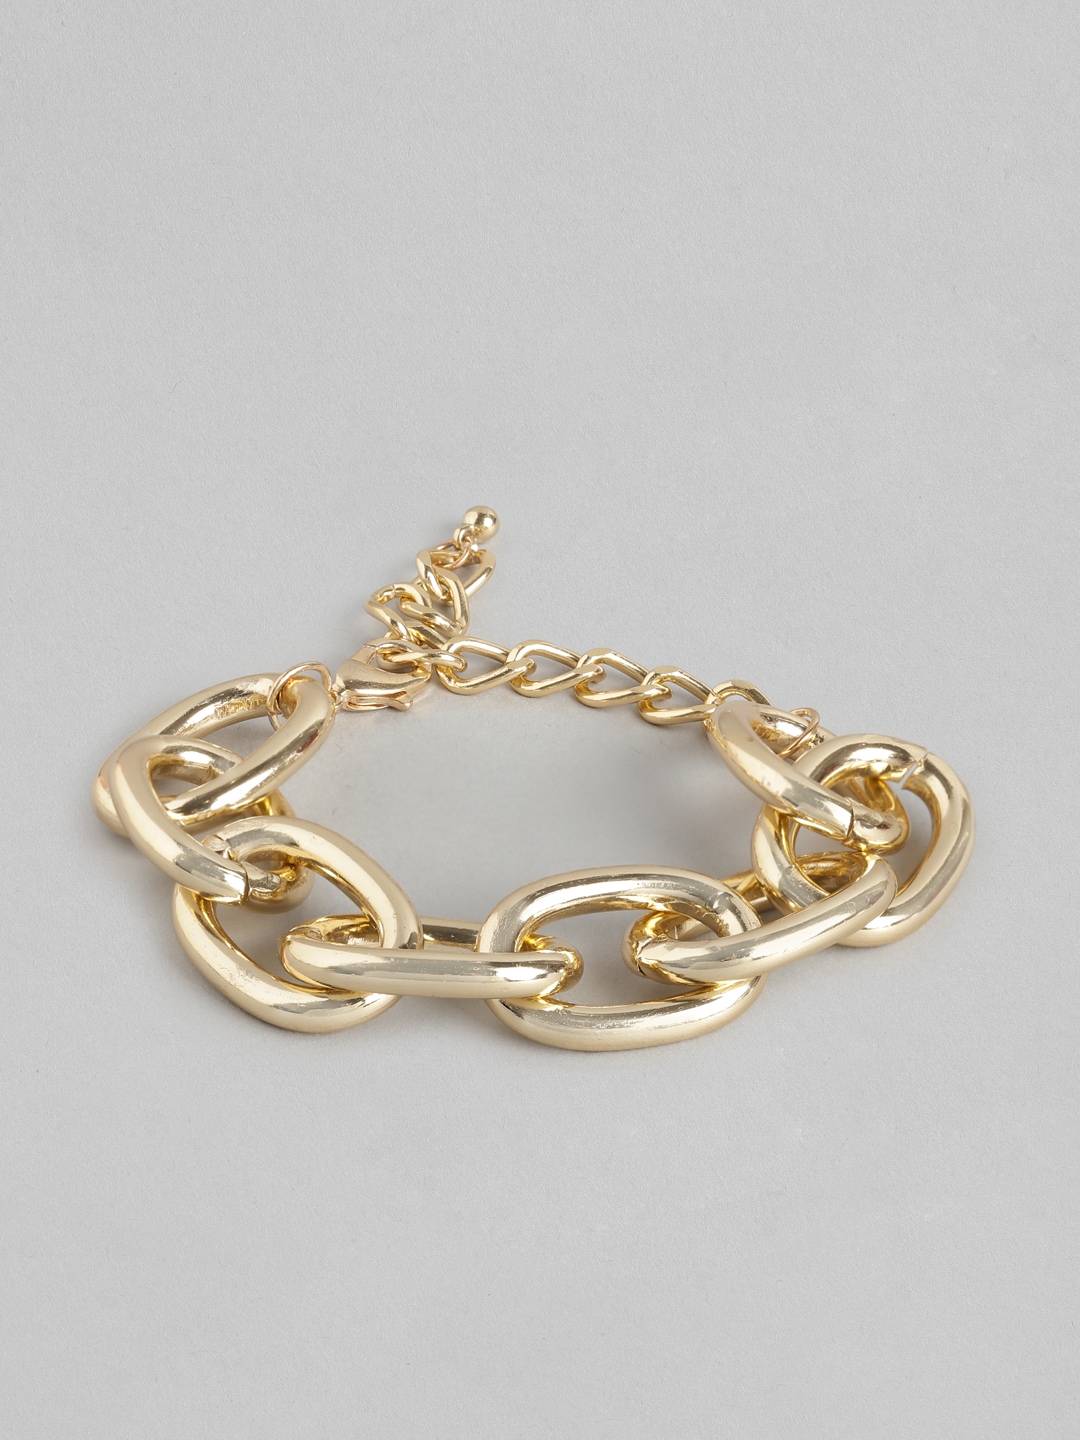 Carlton London Women Gold-Toned Rose Gold-Plated Link Bracelet Price in India